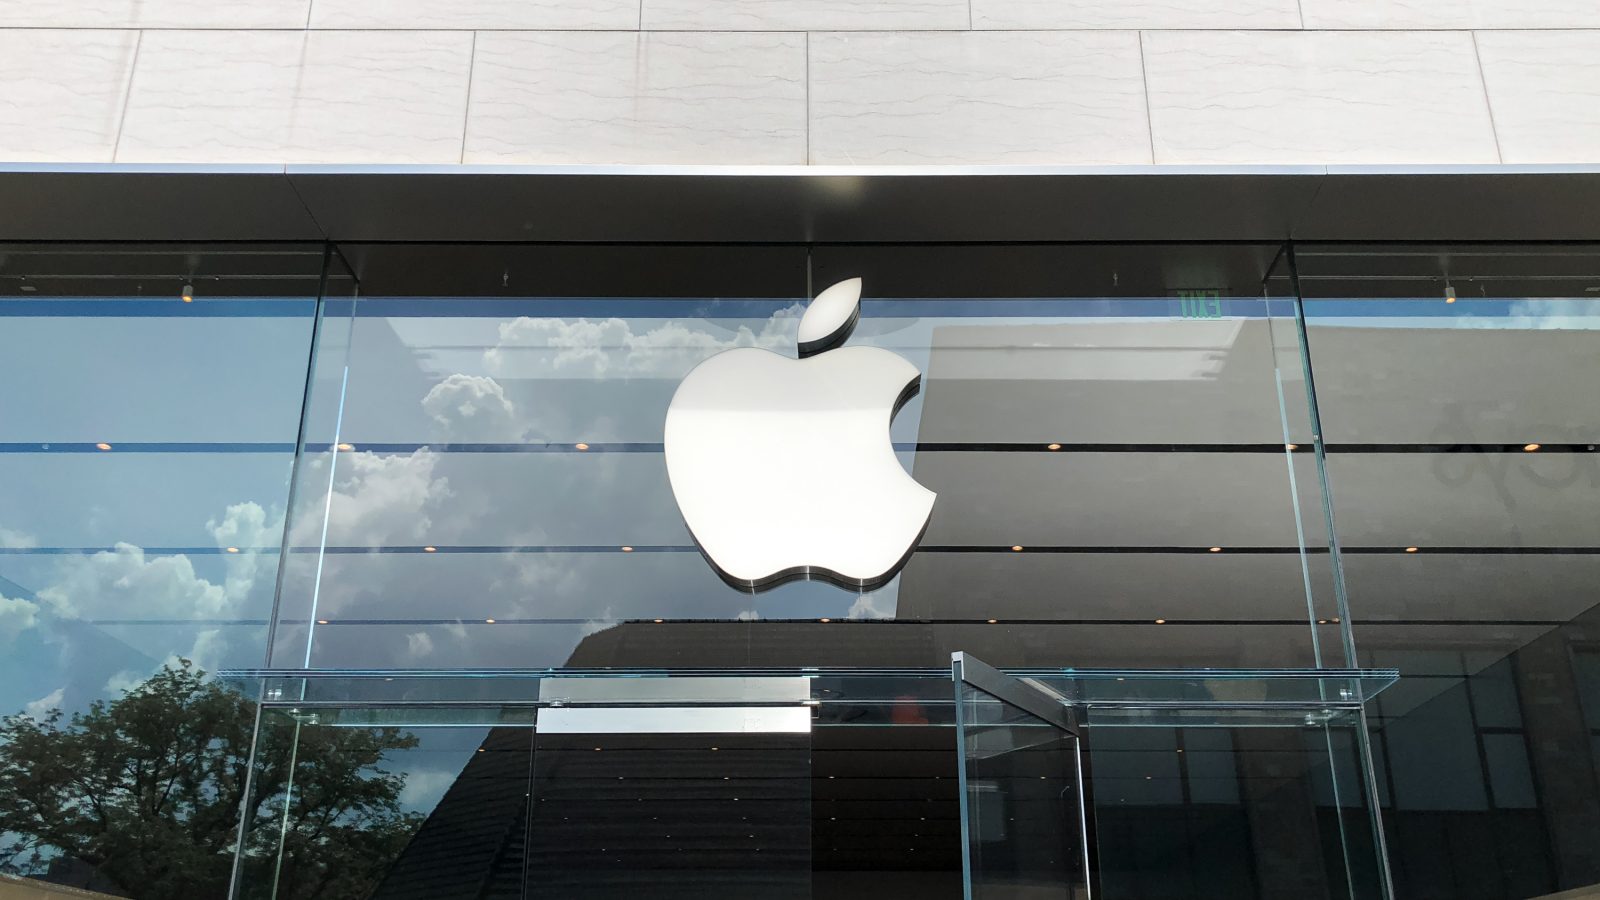 Apple re-closes stores in 4 states following COVID-19 outbreaks - 9to5Mac